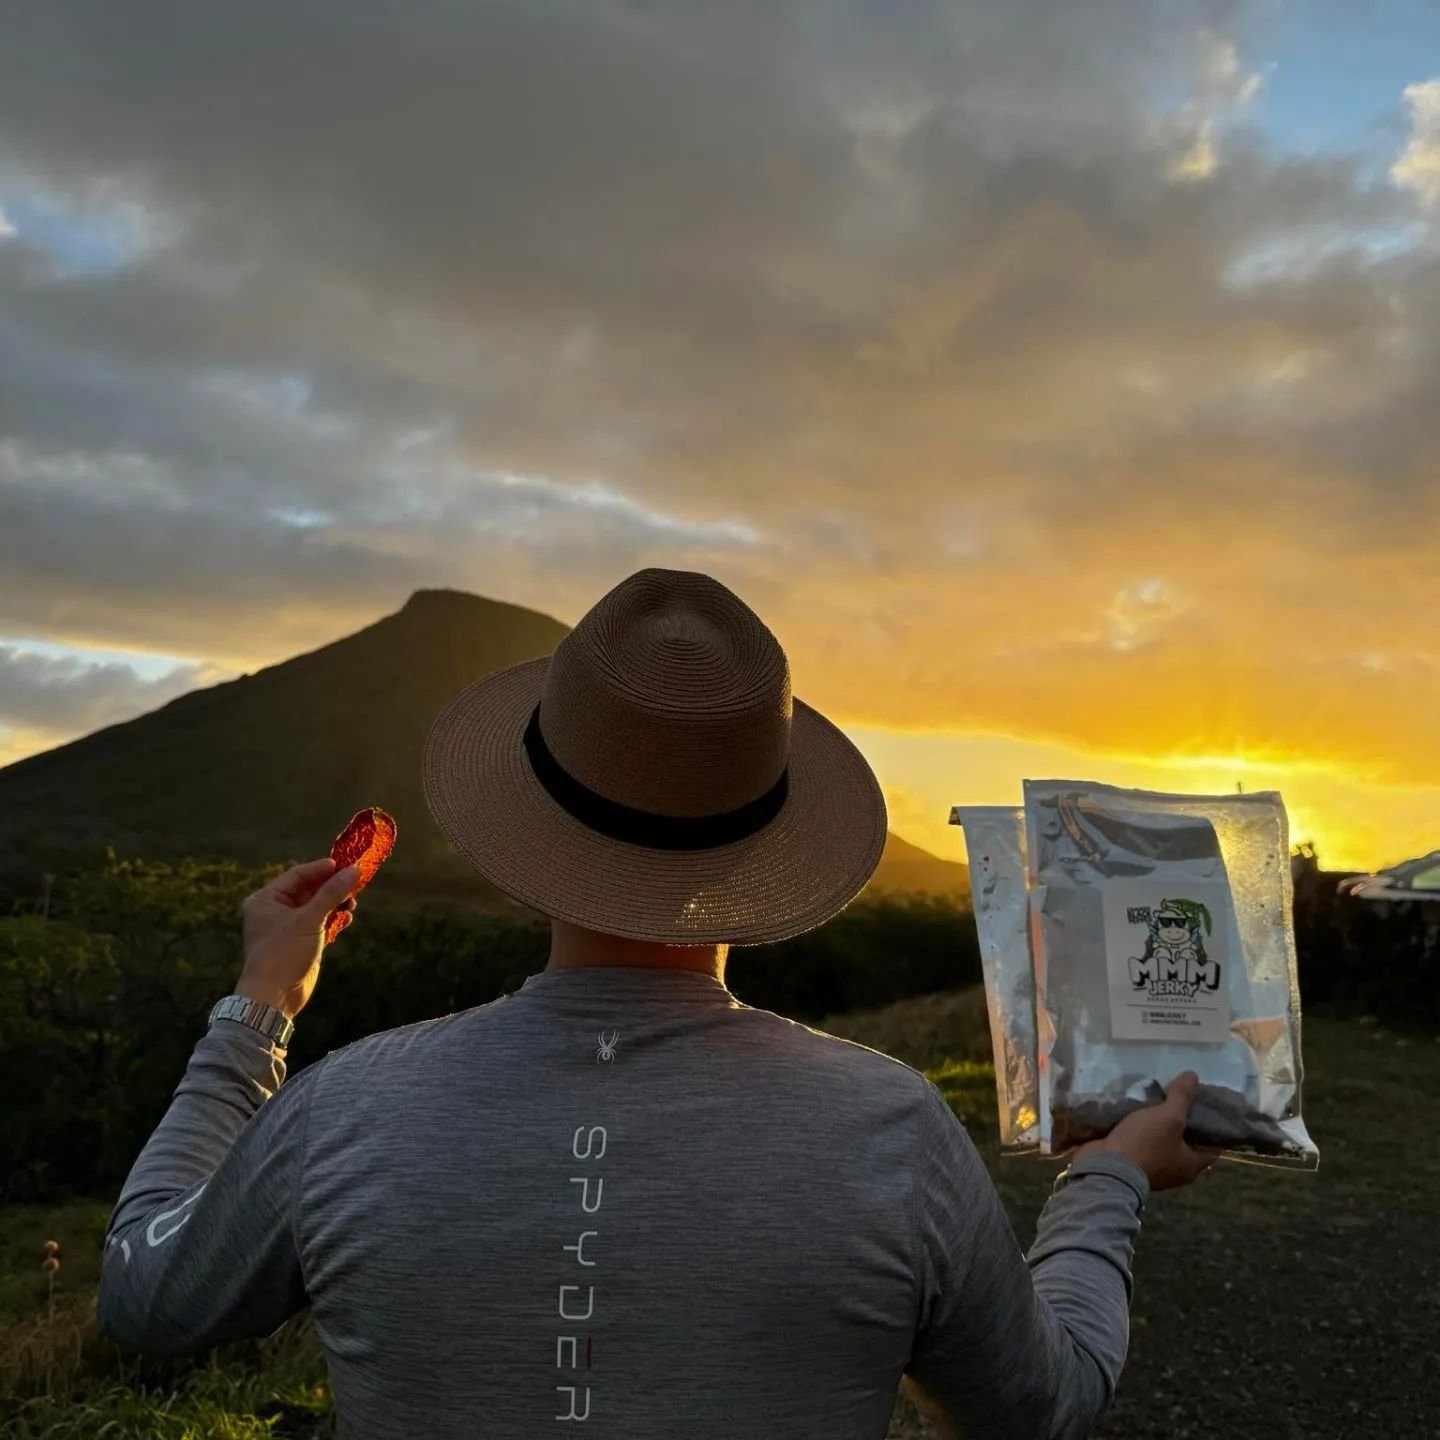 A true testament to how thin our jerky is. Too thin and it breaks apart on your hands, too thick and it's not crispy.
#MMMJerky #BeefJerky #Jerky #MadeWithLove #RenoNevada #SupportiveFriends #CrispyBeefJerky #BeefChips #USDAPrimeBeef #Sunset #RawUned